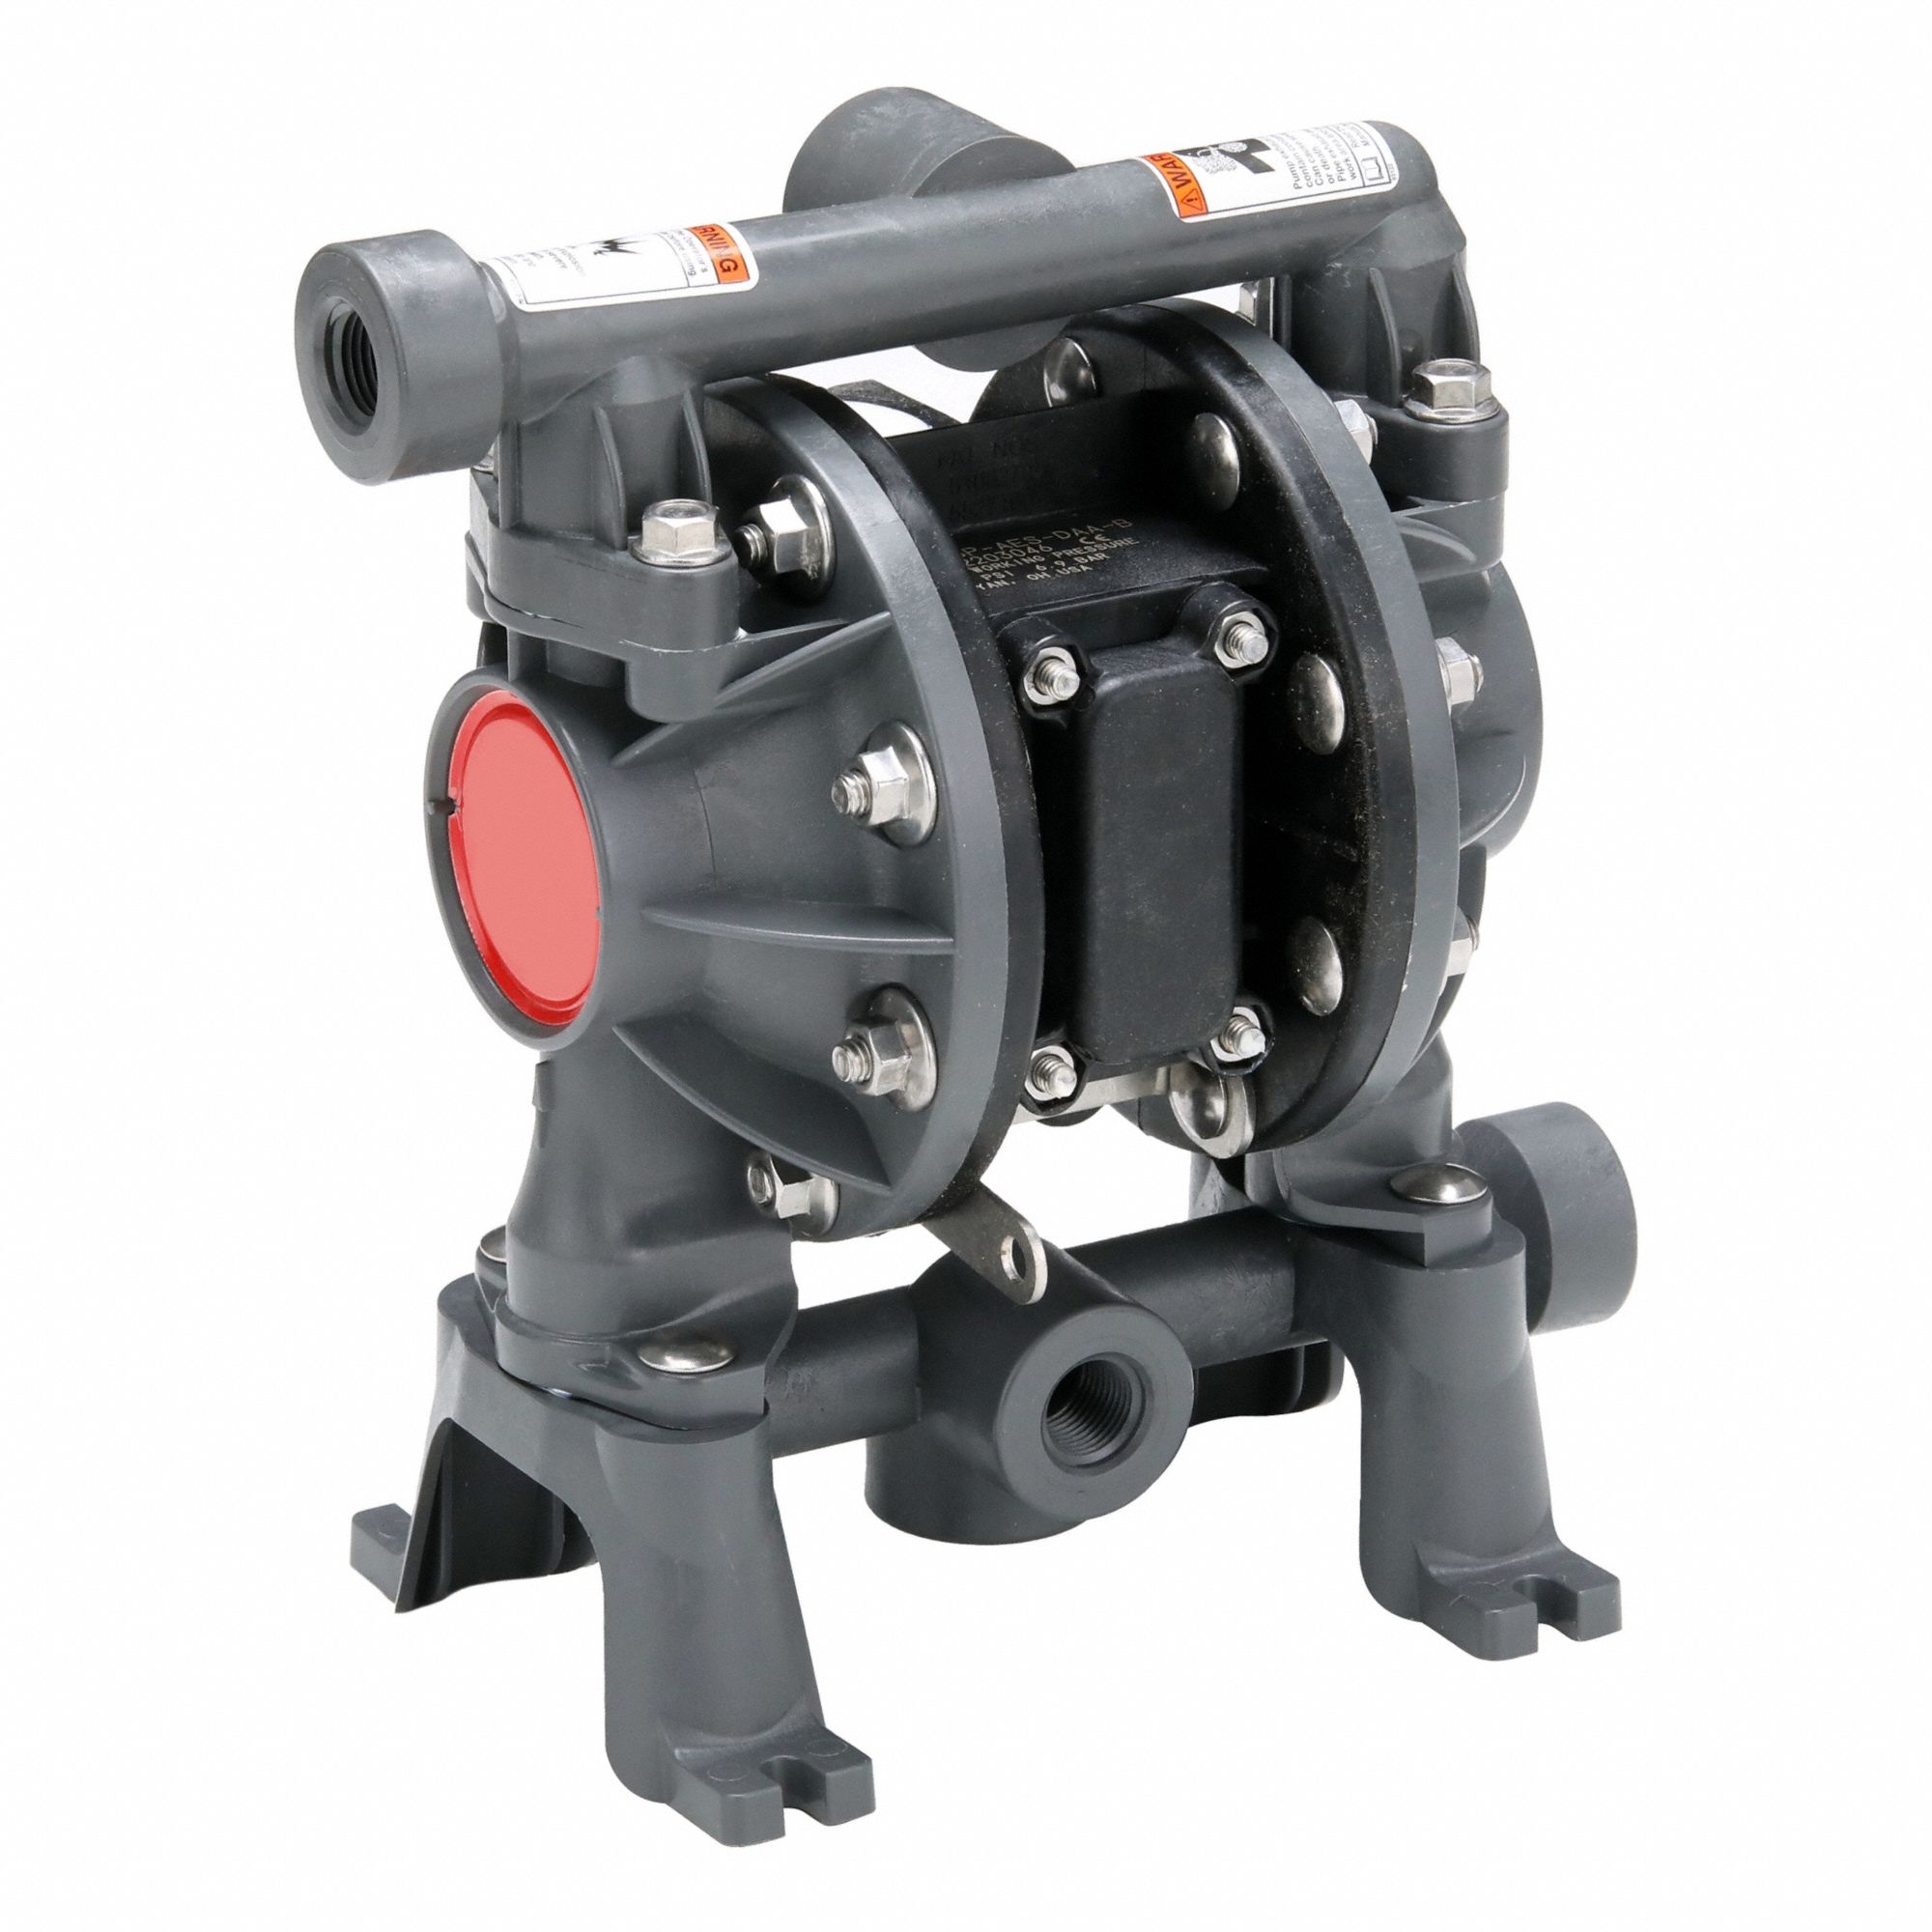 Air-Operated Diaphragm Pump Pneumatic Double Diaphragm Pump 3/8 Inlet &  Outlet Transfer Pump 1/4 Air Inlet for Chemical Industrial Use (18L/min)